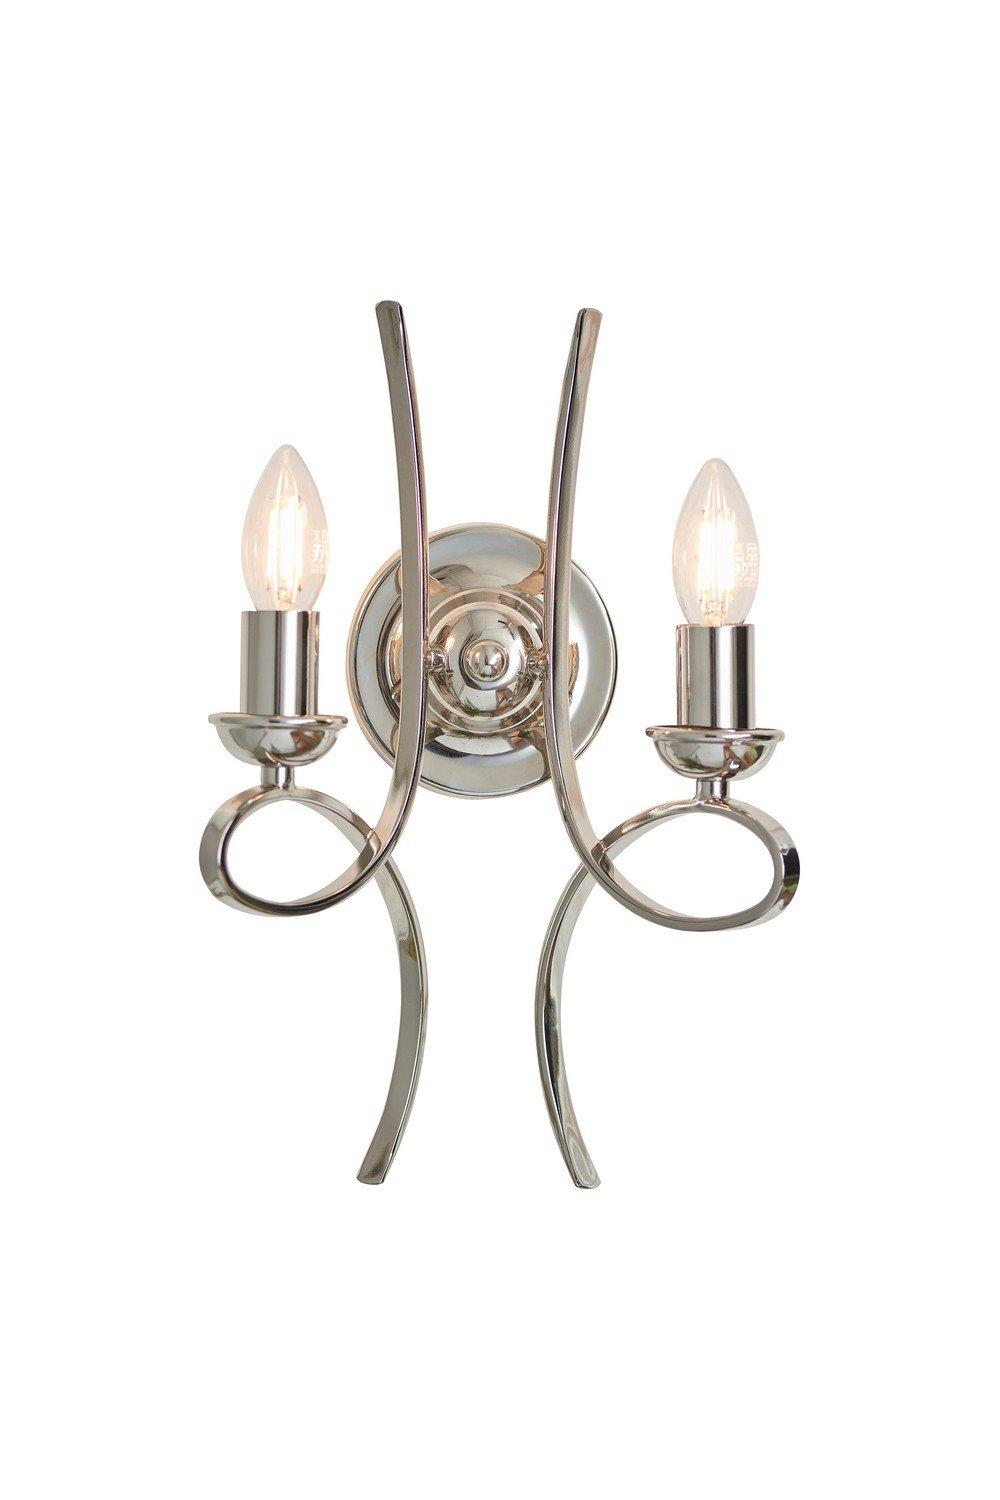 Penn 2 Light Indoor Twin Candle Wall Light Polished Nickel Plate E14